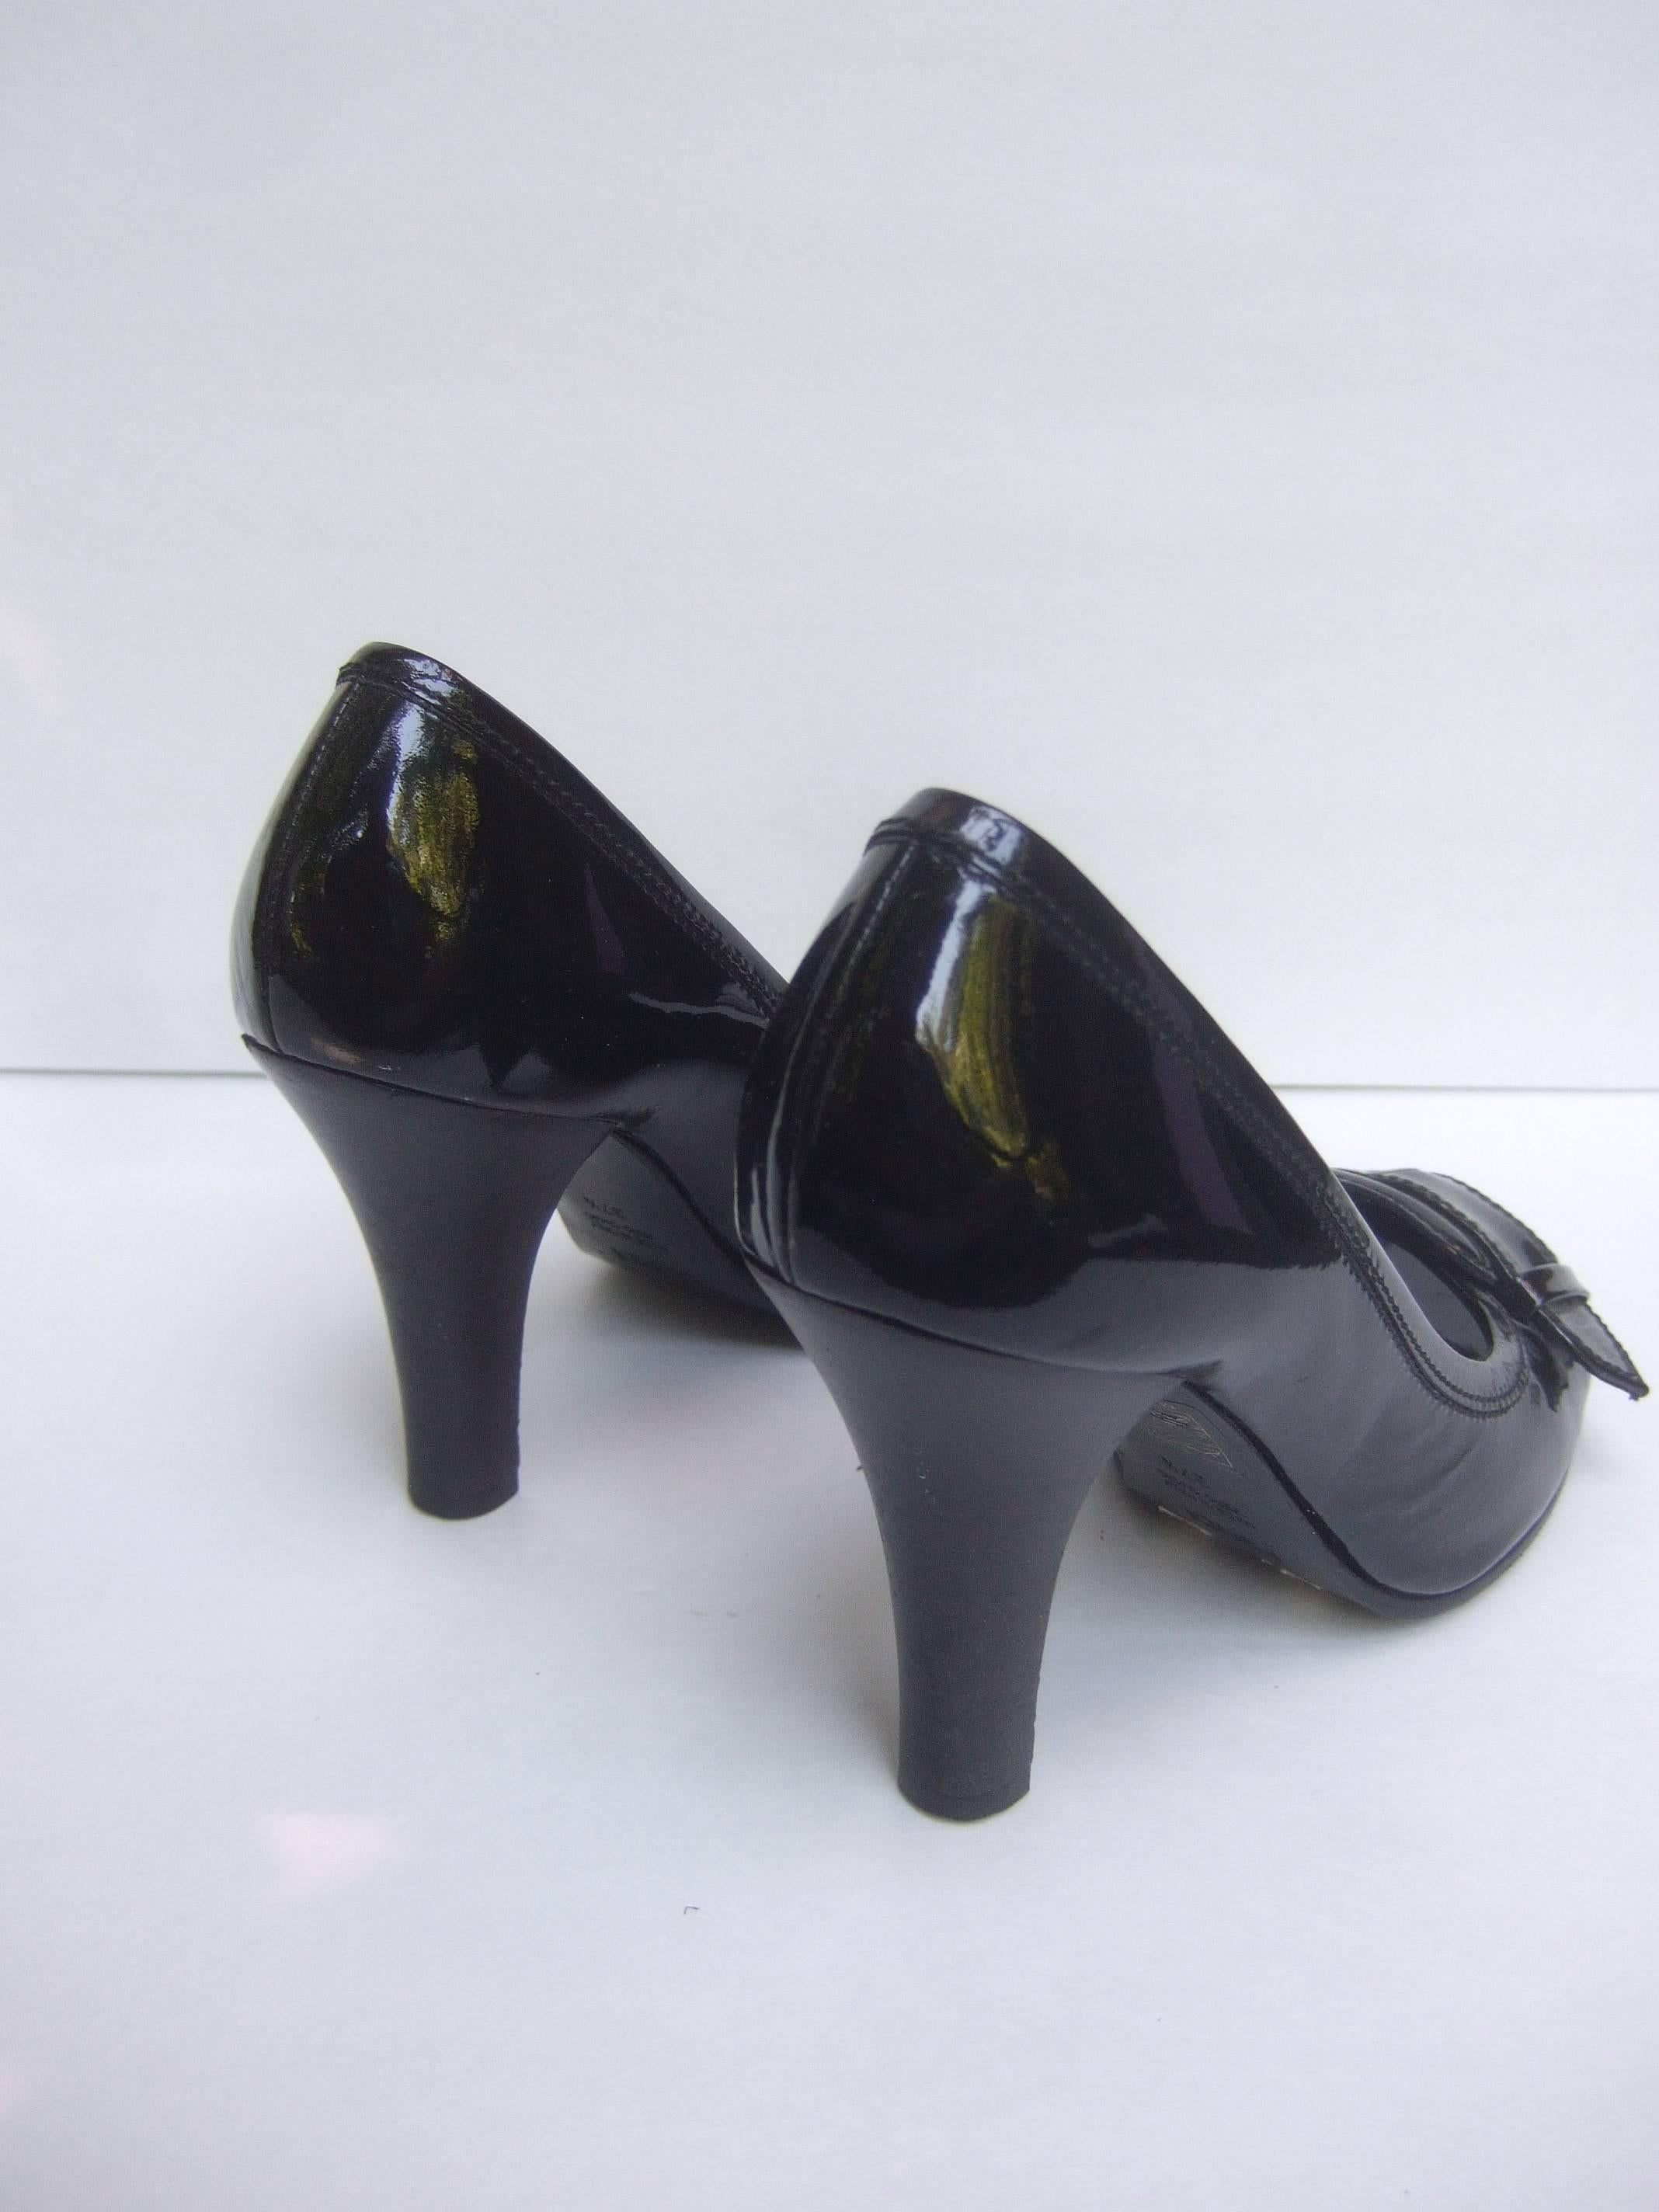 Fendi Italy Black Patent Leather Buckle Pumps 37.5 For Sale 2